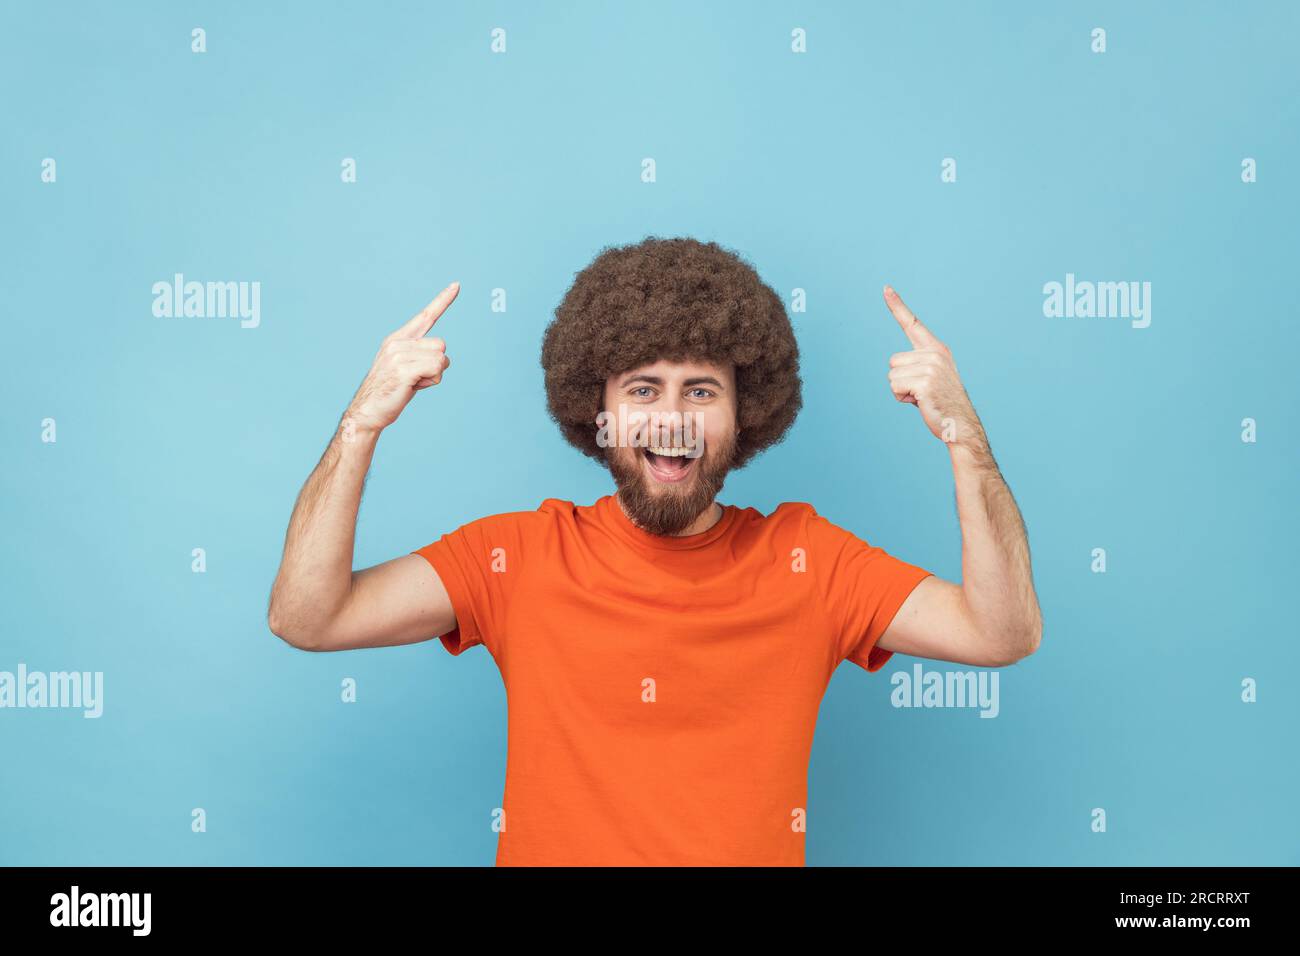 Portrait of extremely happy man with Afro hairstyle in orange T-shirt pointing finger up with toothy smile on face, clever smart man has idea, start up. Indoor studio shot isolated on blue background. Stock Photo